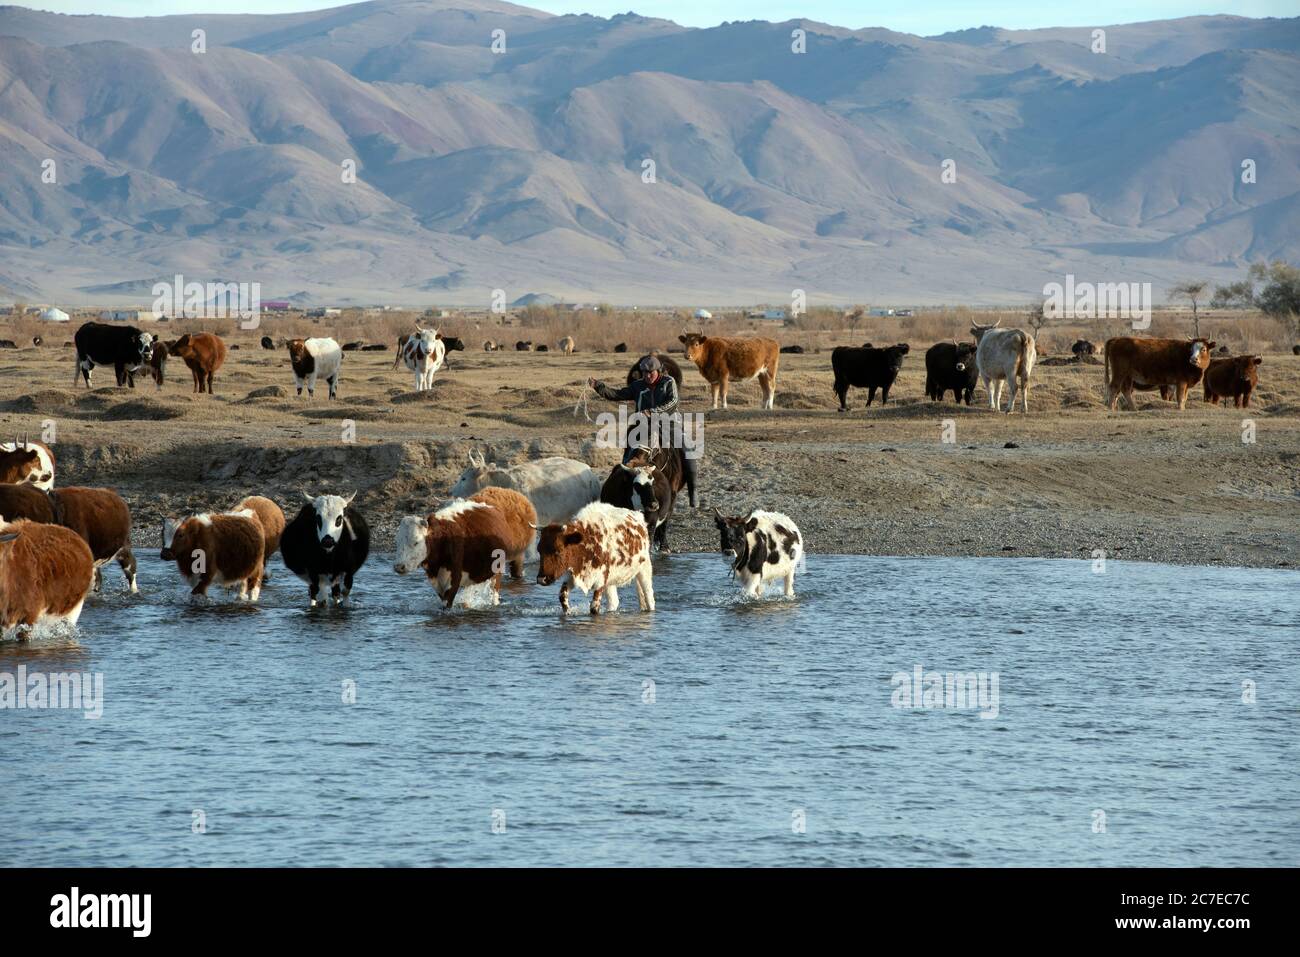 A nomadic Kazakh herder on horseback driving his herd of cattle across a river in the Altai Mountains, western Mongolia. Stock Photo